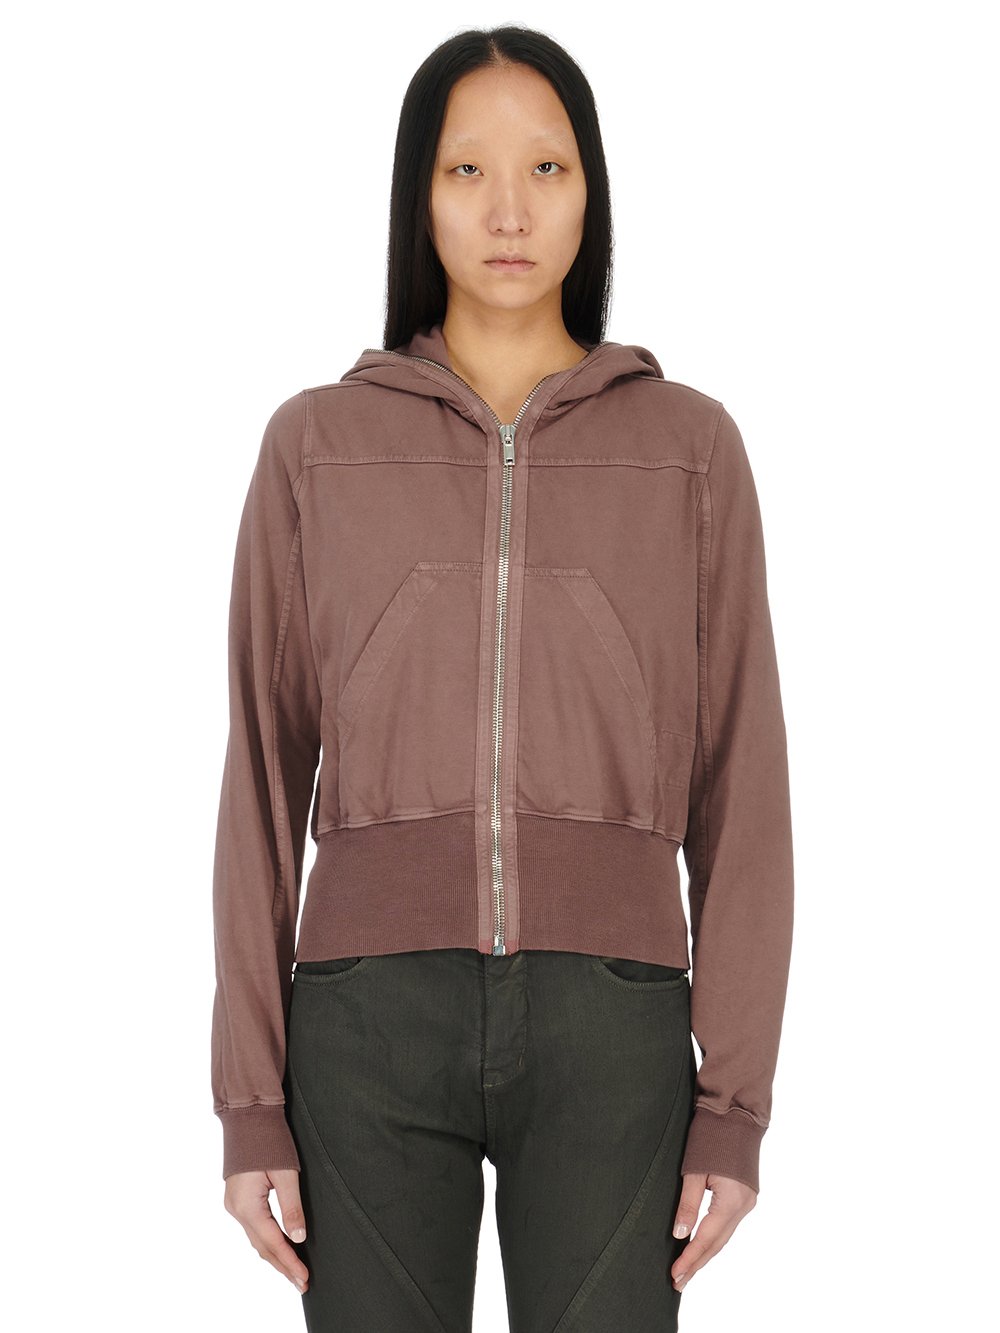 RICK OWENS FW23 LUXOR SMALL GIMP HOODIE IN MAUVE COMPACT HEAVY COTTON JERSEY